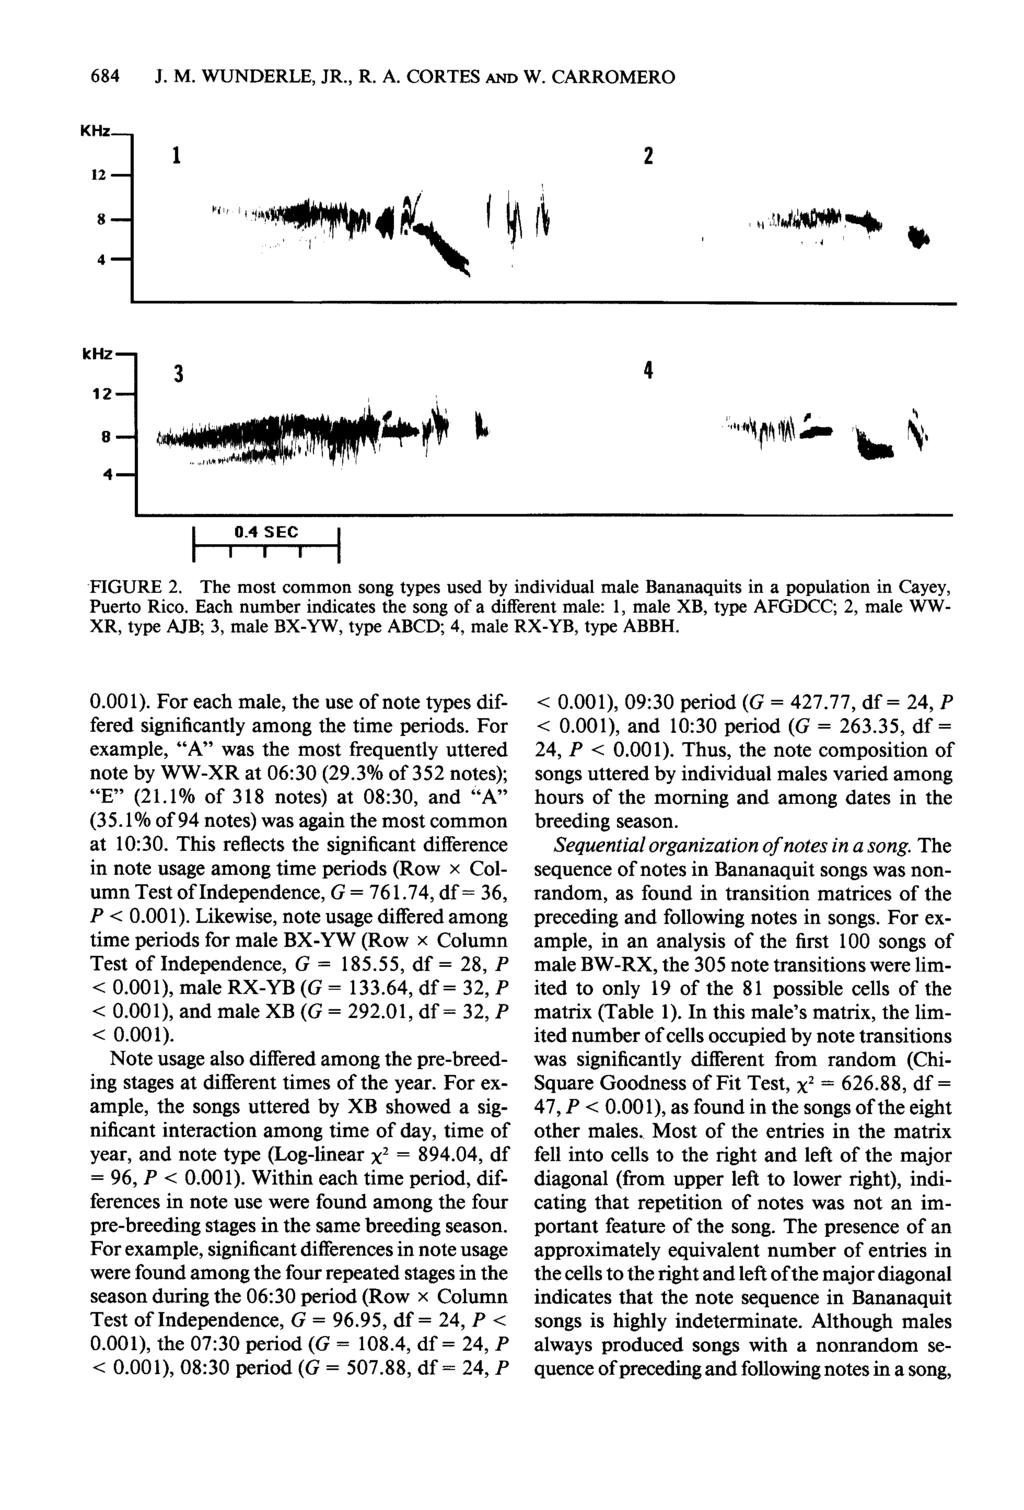 684 J. M. WUNDERLE, JR., R. A. CORTES AND W. CARROMERO KHz 12 1 2 khz 12 3 4 FIGURE 2. The most common song types used by individual male Bananaquits in a population in Cayey, Puerto Rico.